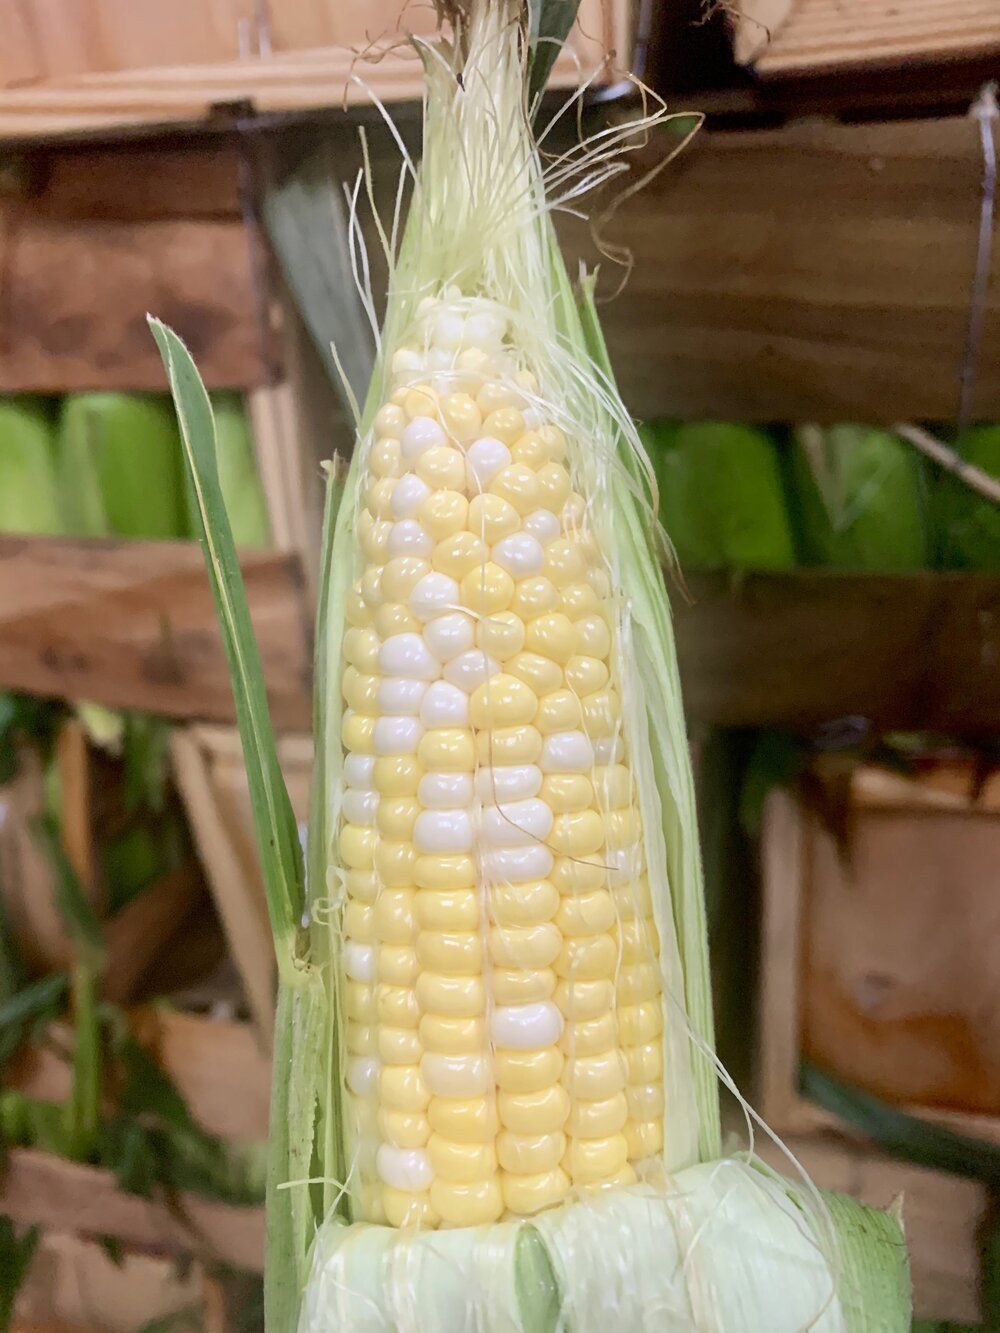 Next Happening: Sweet Corn from Fry Funny Farm - What A Treat!